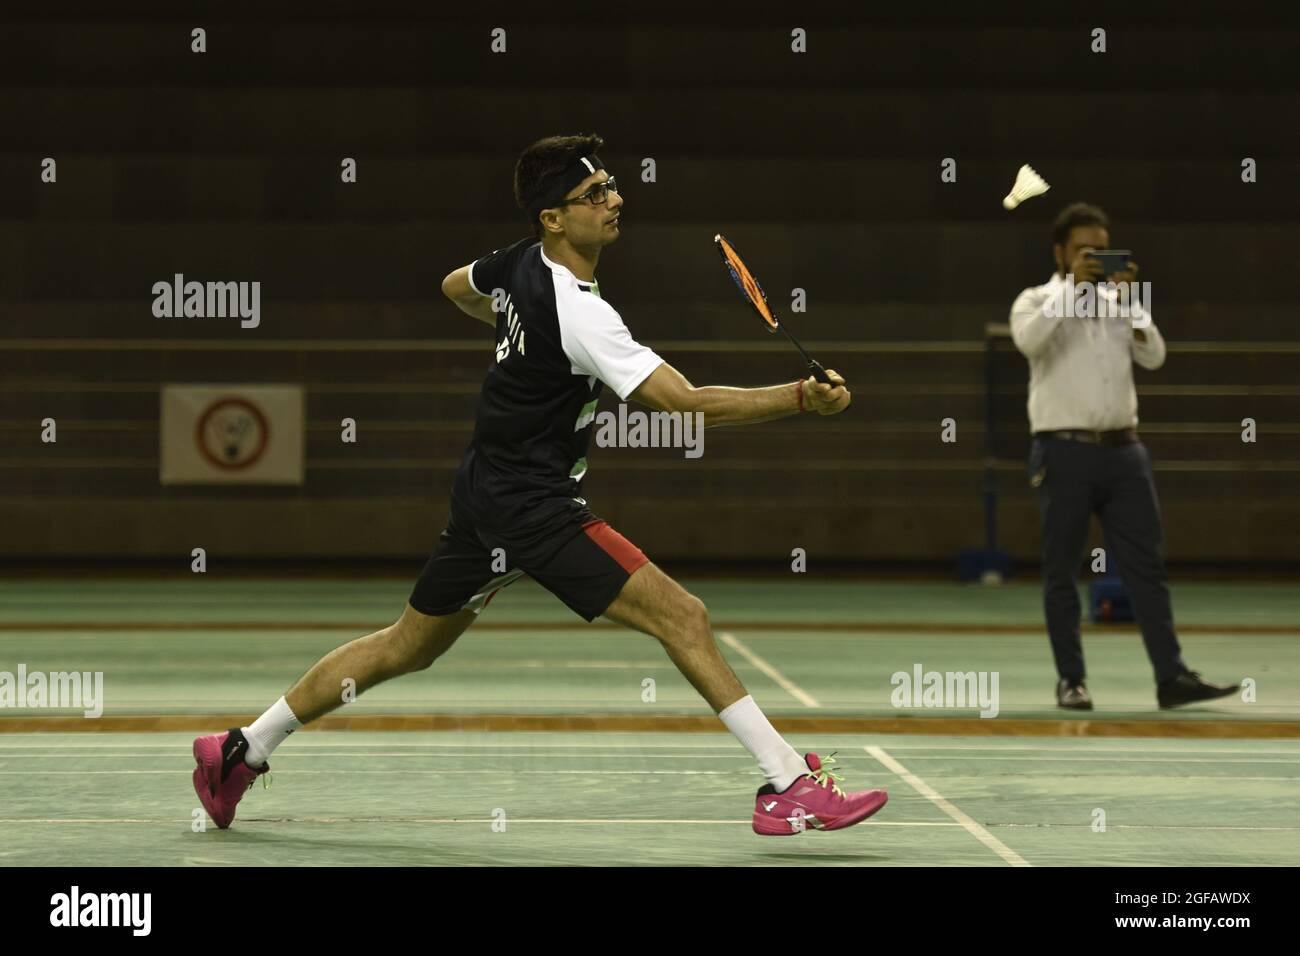 GREATER NOIDA, INDIA - AUGUST 20: Guatam Budh Nagar Magistrate and para-badminton player Suhas Lalinakere Yathiraj plays a shot during practice at a stadium, on August 20, 2021 in Greater Noida, India. IAS Suhas LY, currently world number two will represent India in men’s singles SL4 at the Tokyo Paralympics Games. The GB Nagar DM is 2018 Asian Para Games bronze medallist and 2016 Asian Championships gold medallist in the sport. (Photo by Sunil Ghosh/Hindustan Times/Sipa USA) Stock Photo